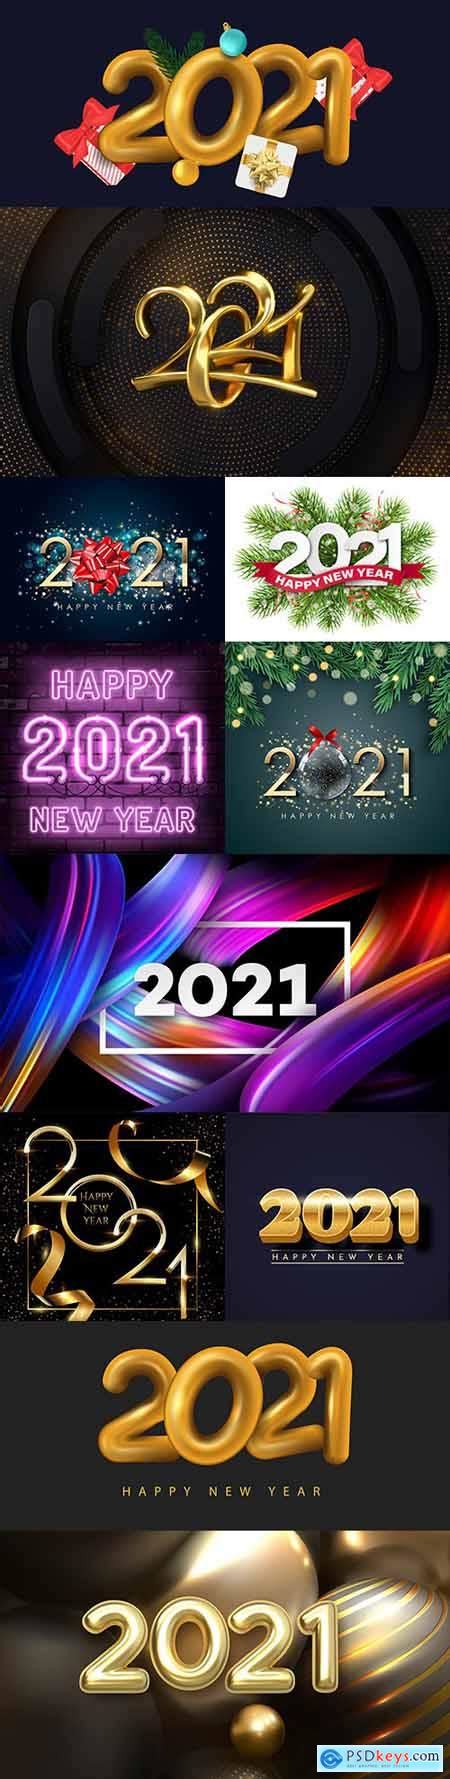 Sign up to our newsletter newsletter. Happy New Year 2021 decorative design inscription » Free ...